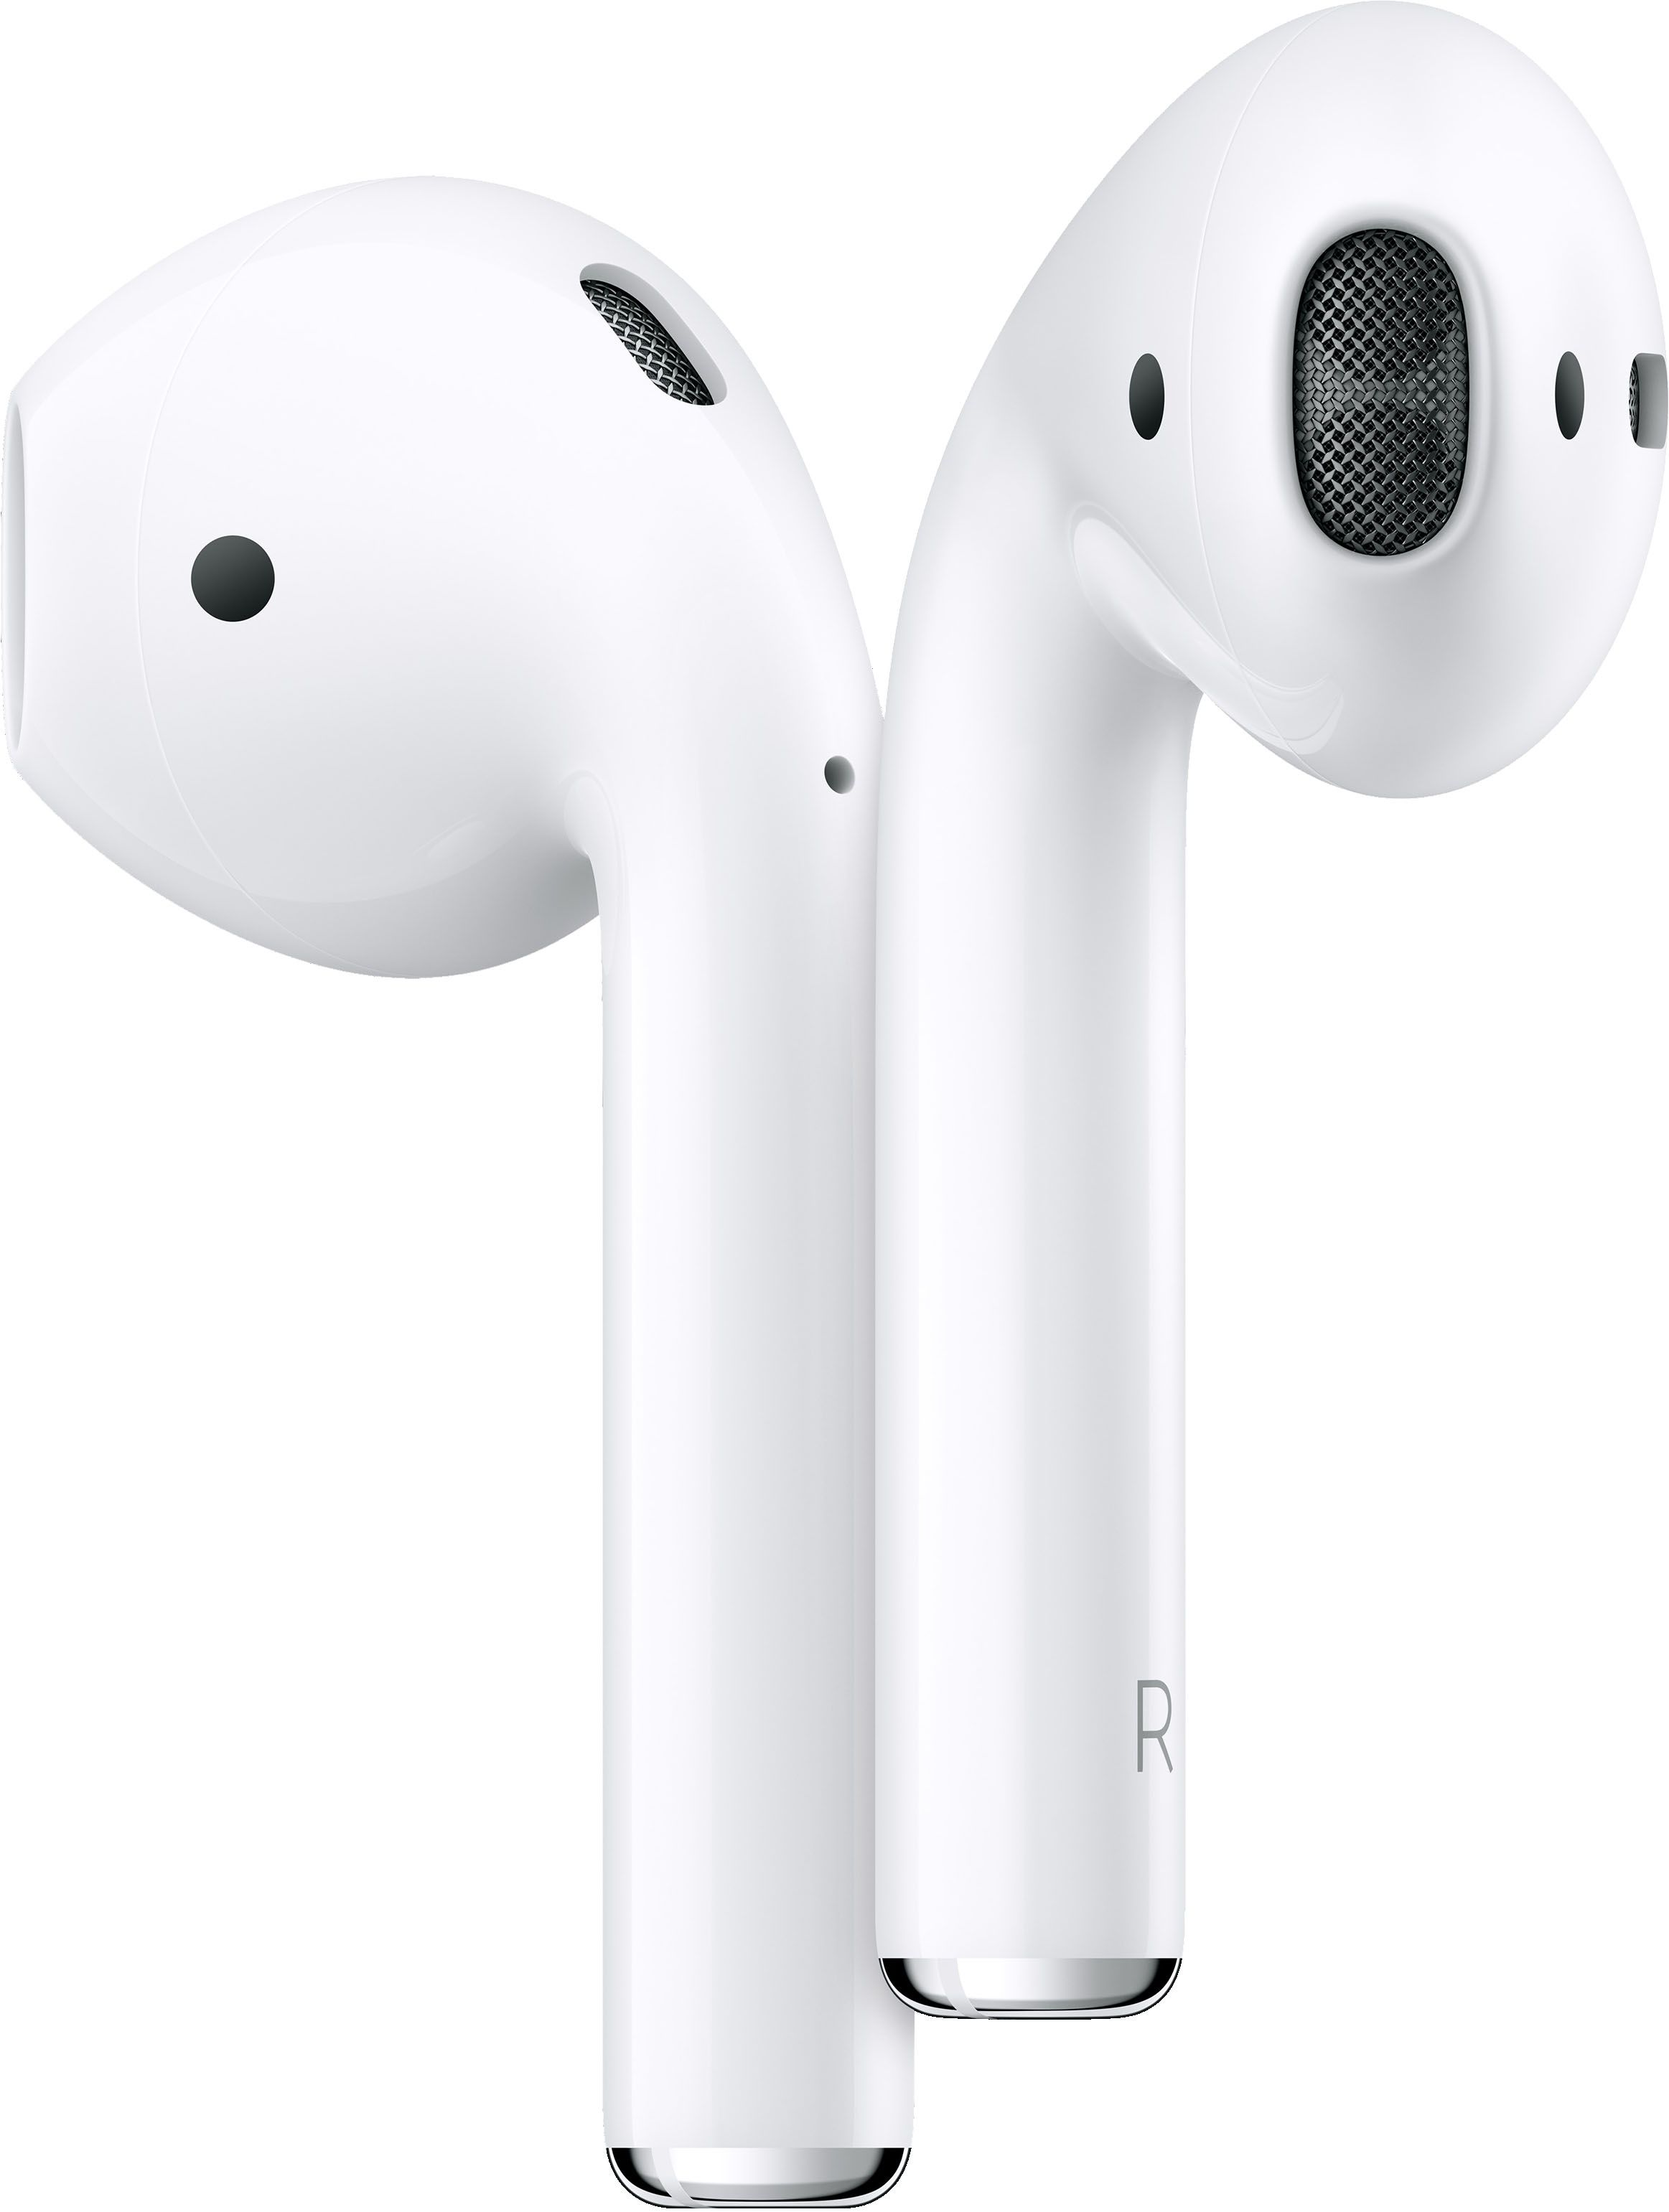 Apple AirPods with Charging Case (Latest Model) White MV7N2AM/A - Best Buy | Best Buy U.S.